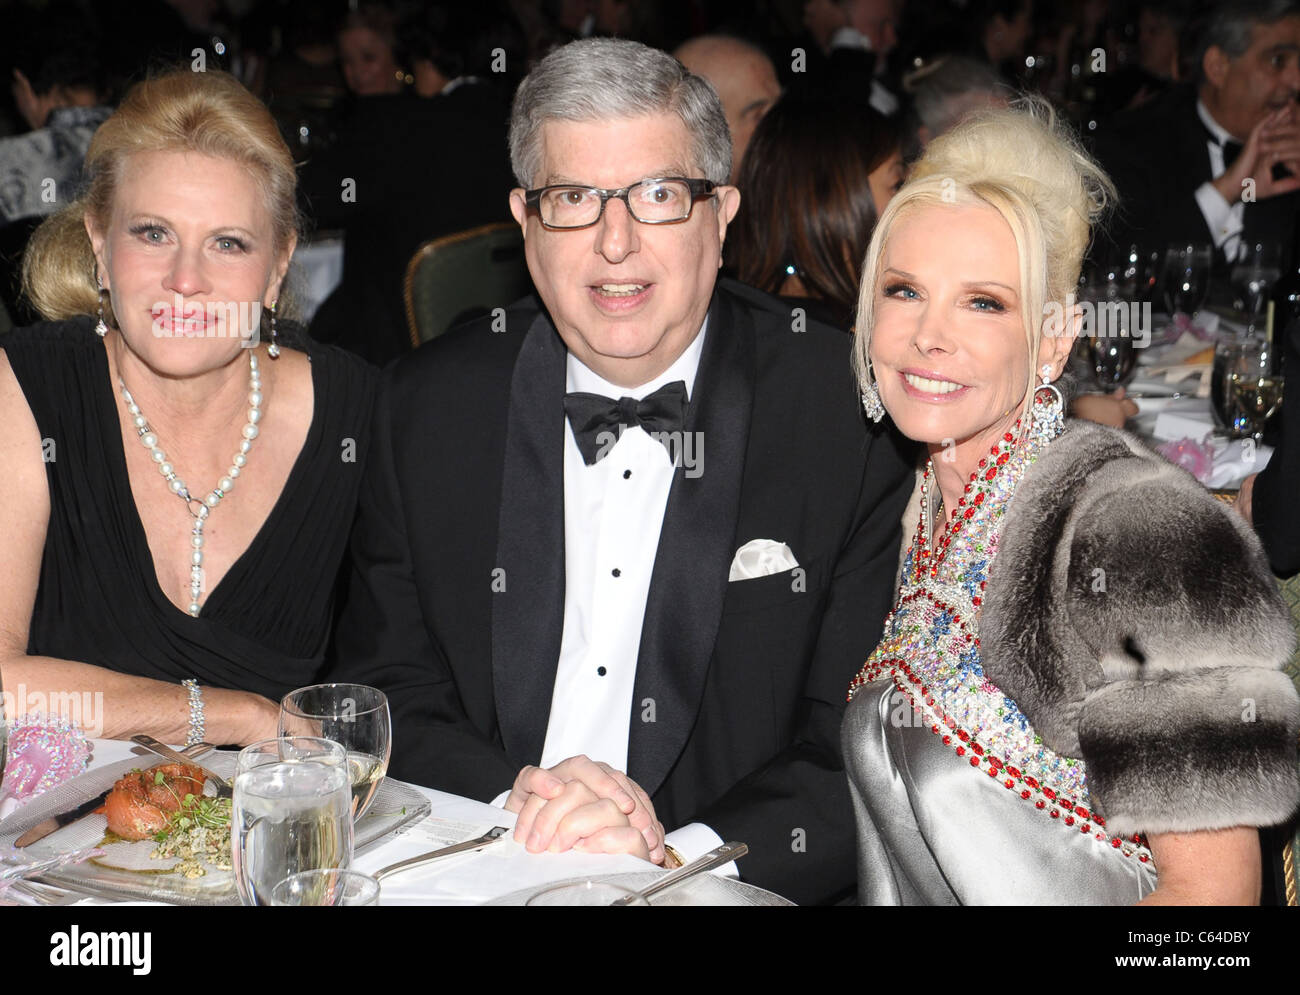 Louise Kornfeld, Marvin Hamlisch, Michele Herbert in attendance for Career Transition For Dancer's 25th Anniversary Silver Jubilee Anniversary Supper with the Stars, Hilton New York, New York, NY November 8, 2010. Photo By: Rob Rich/Everett Collection Stock Photo